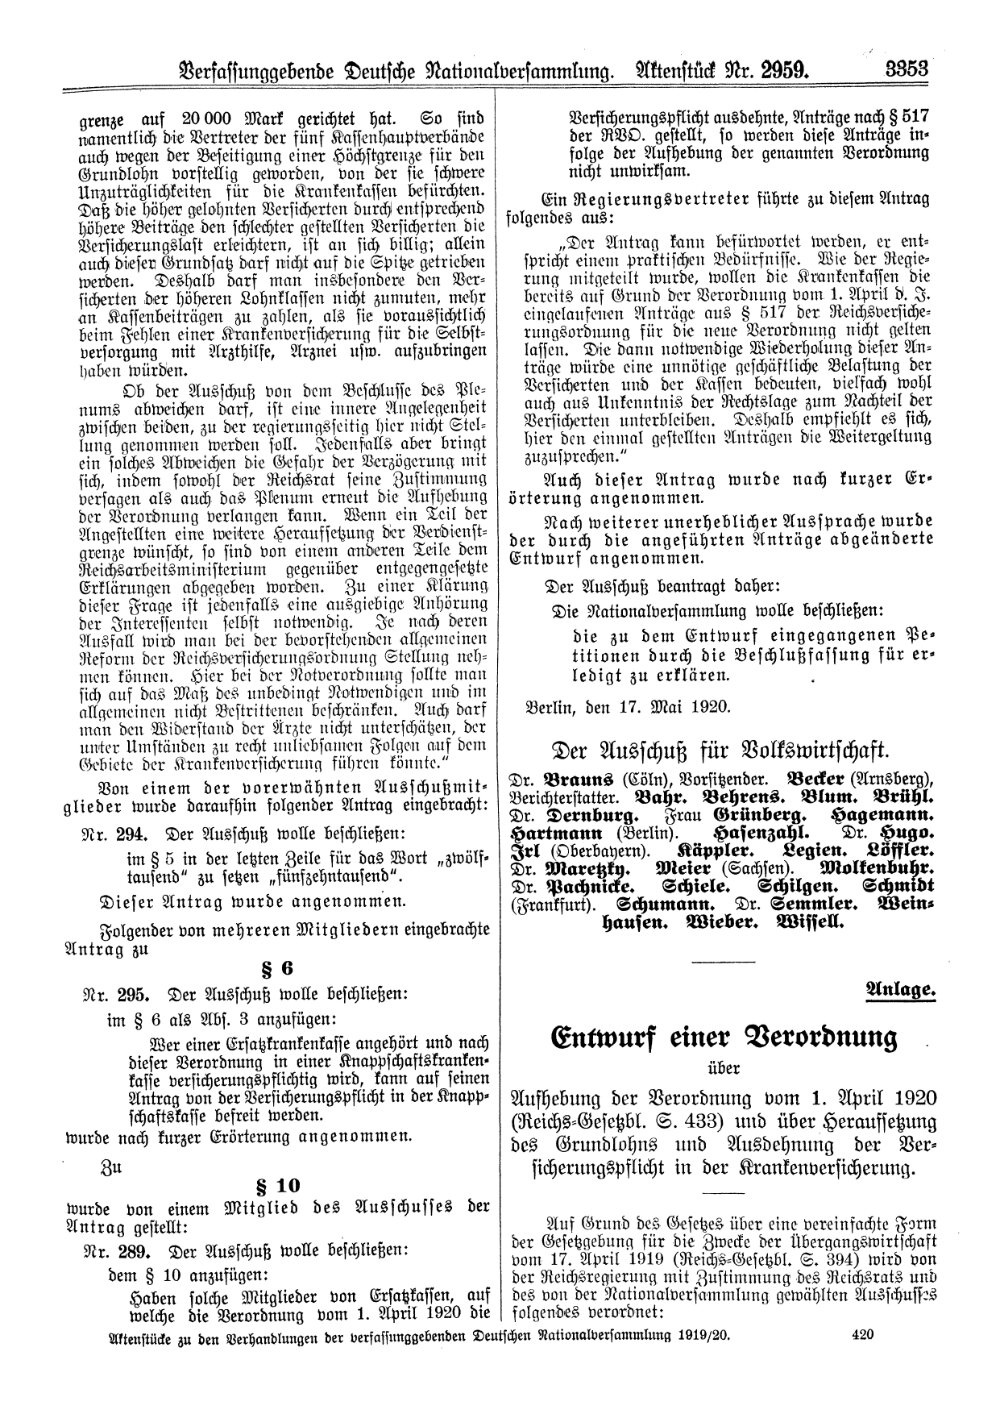 Scan of page 3353